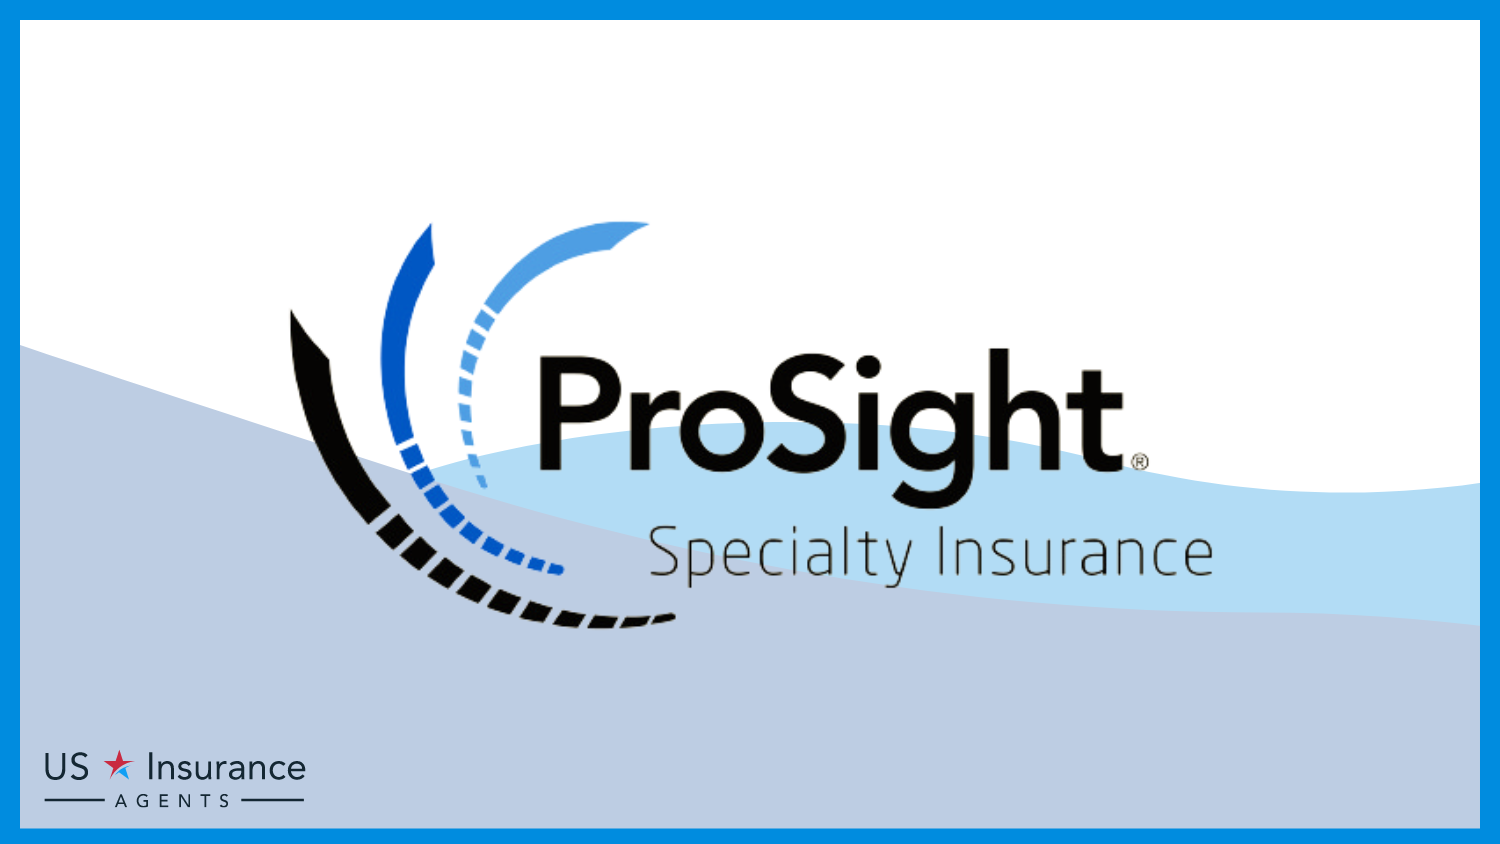 ProSight Specialty Insurance: Best Business Insurance for Gyms